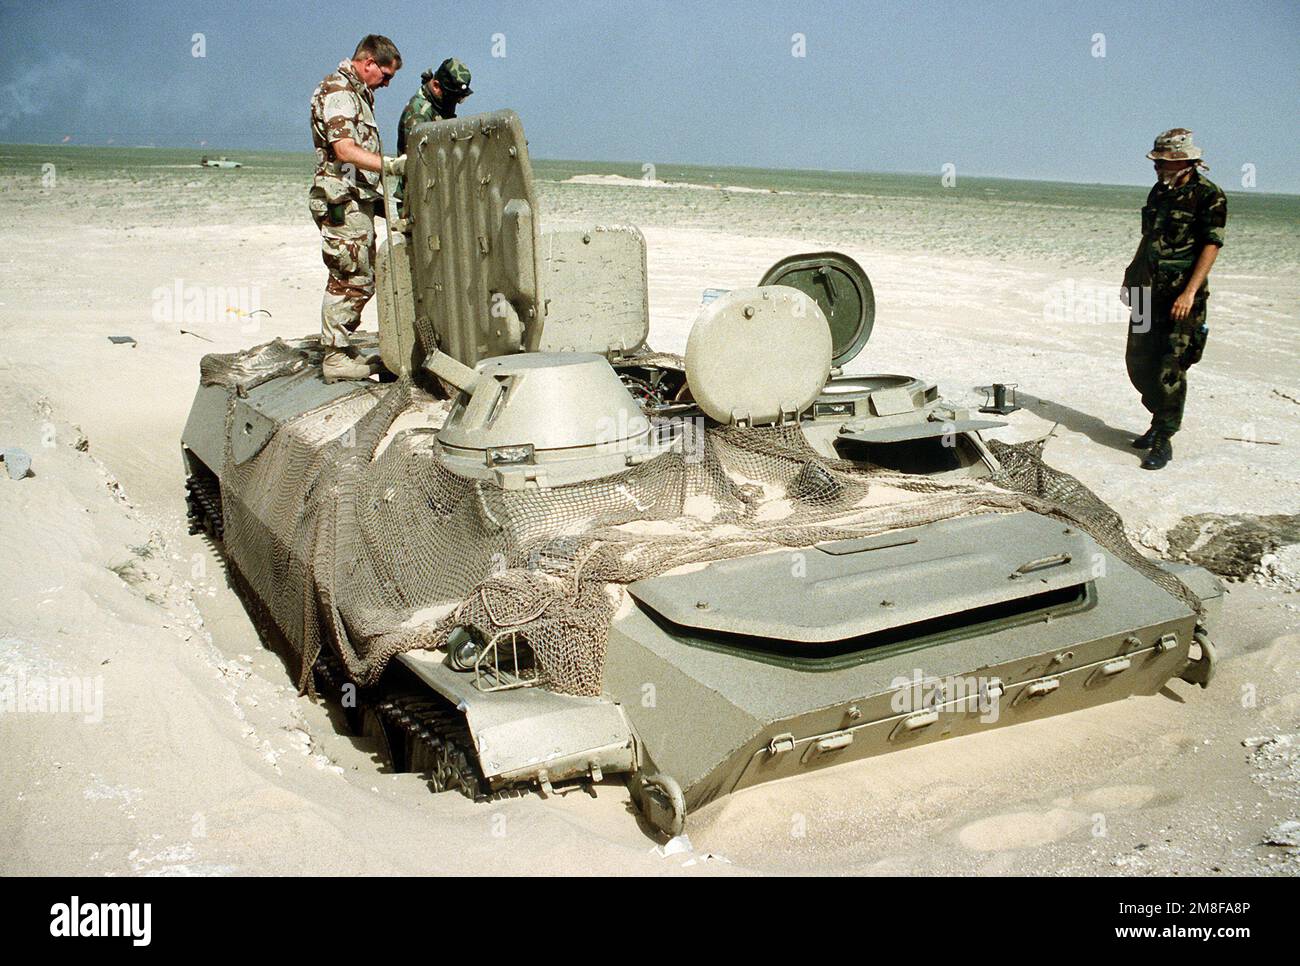 U.S. soldiers inspect an Iraqi MT-LB armored personnel carrier abandoned near Ali Al Salem Air Base during Operation Desert Storm.. Subject Operation/Series: DESERT STORM Base: Ali Al Salem Air Base Country: Kuwait(KWT) Stock Photo